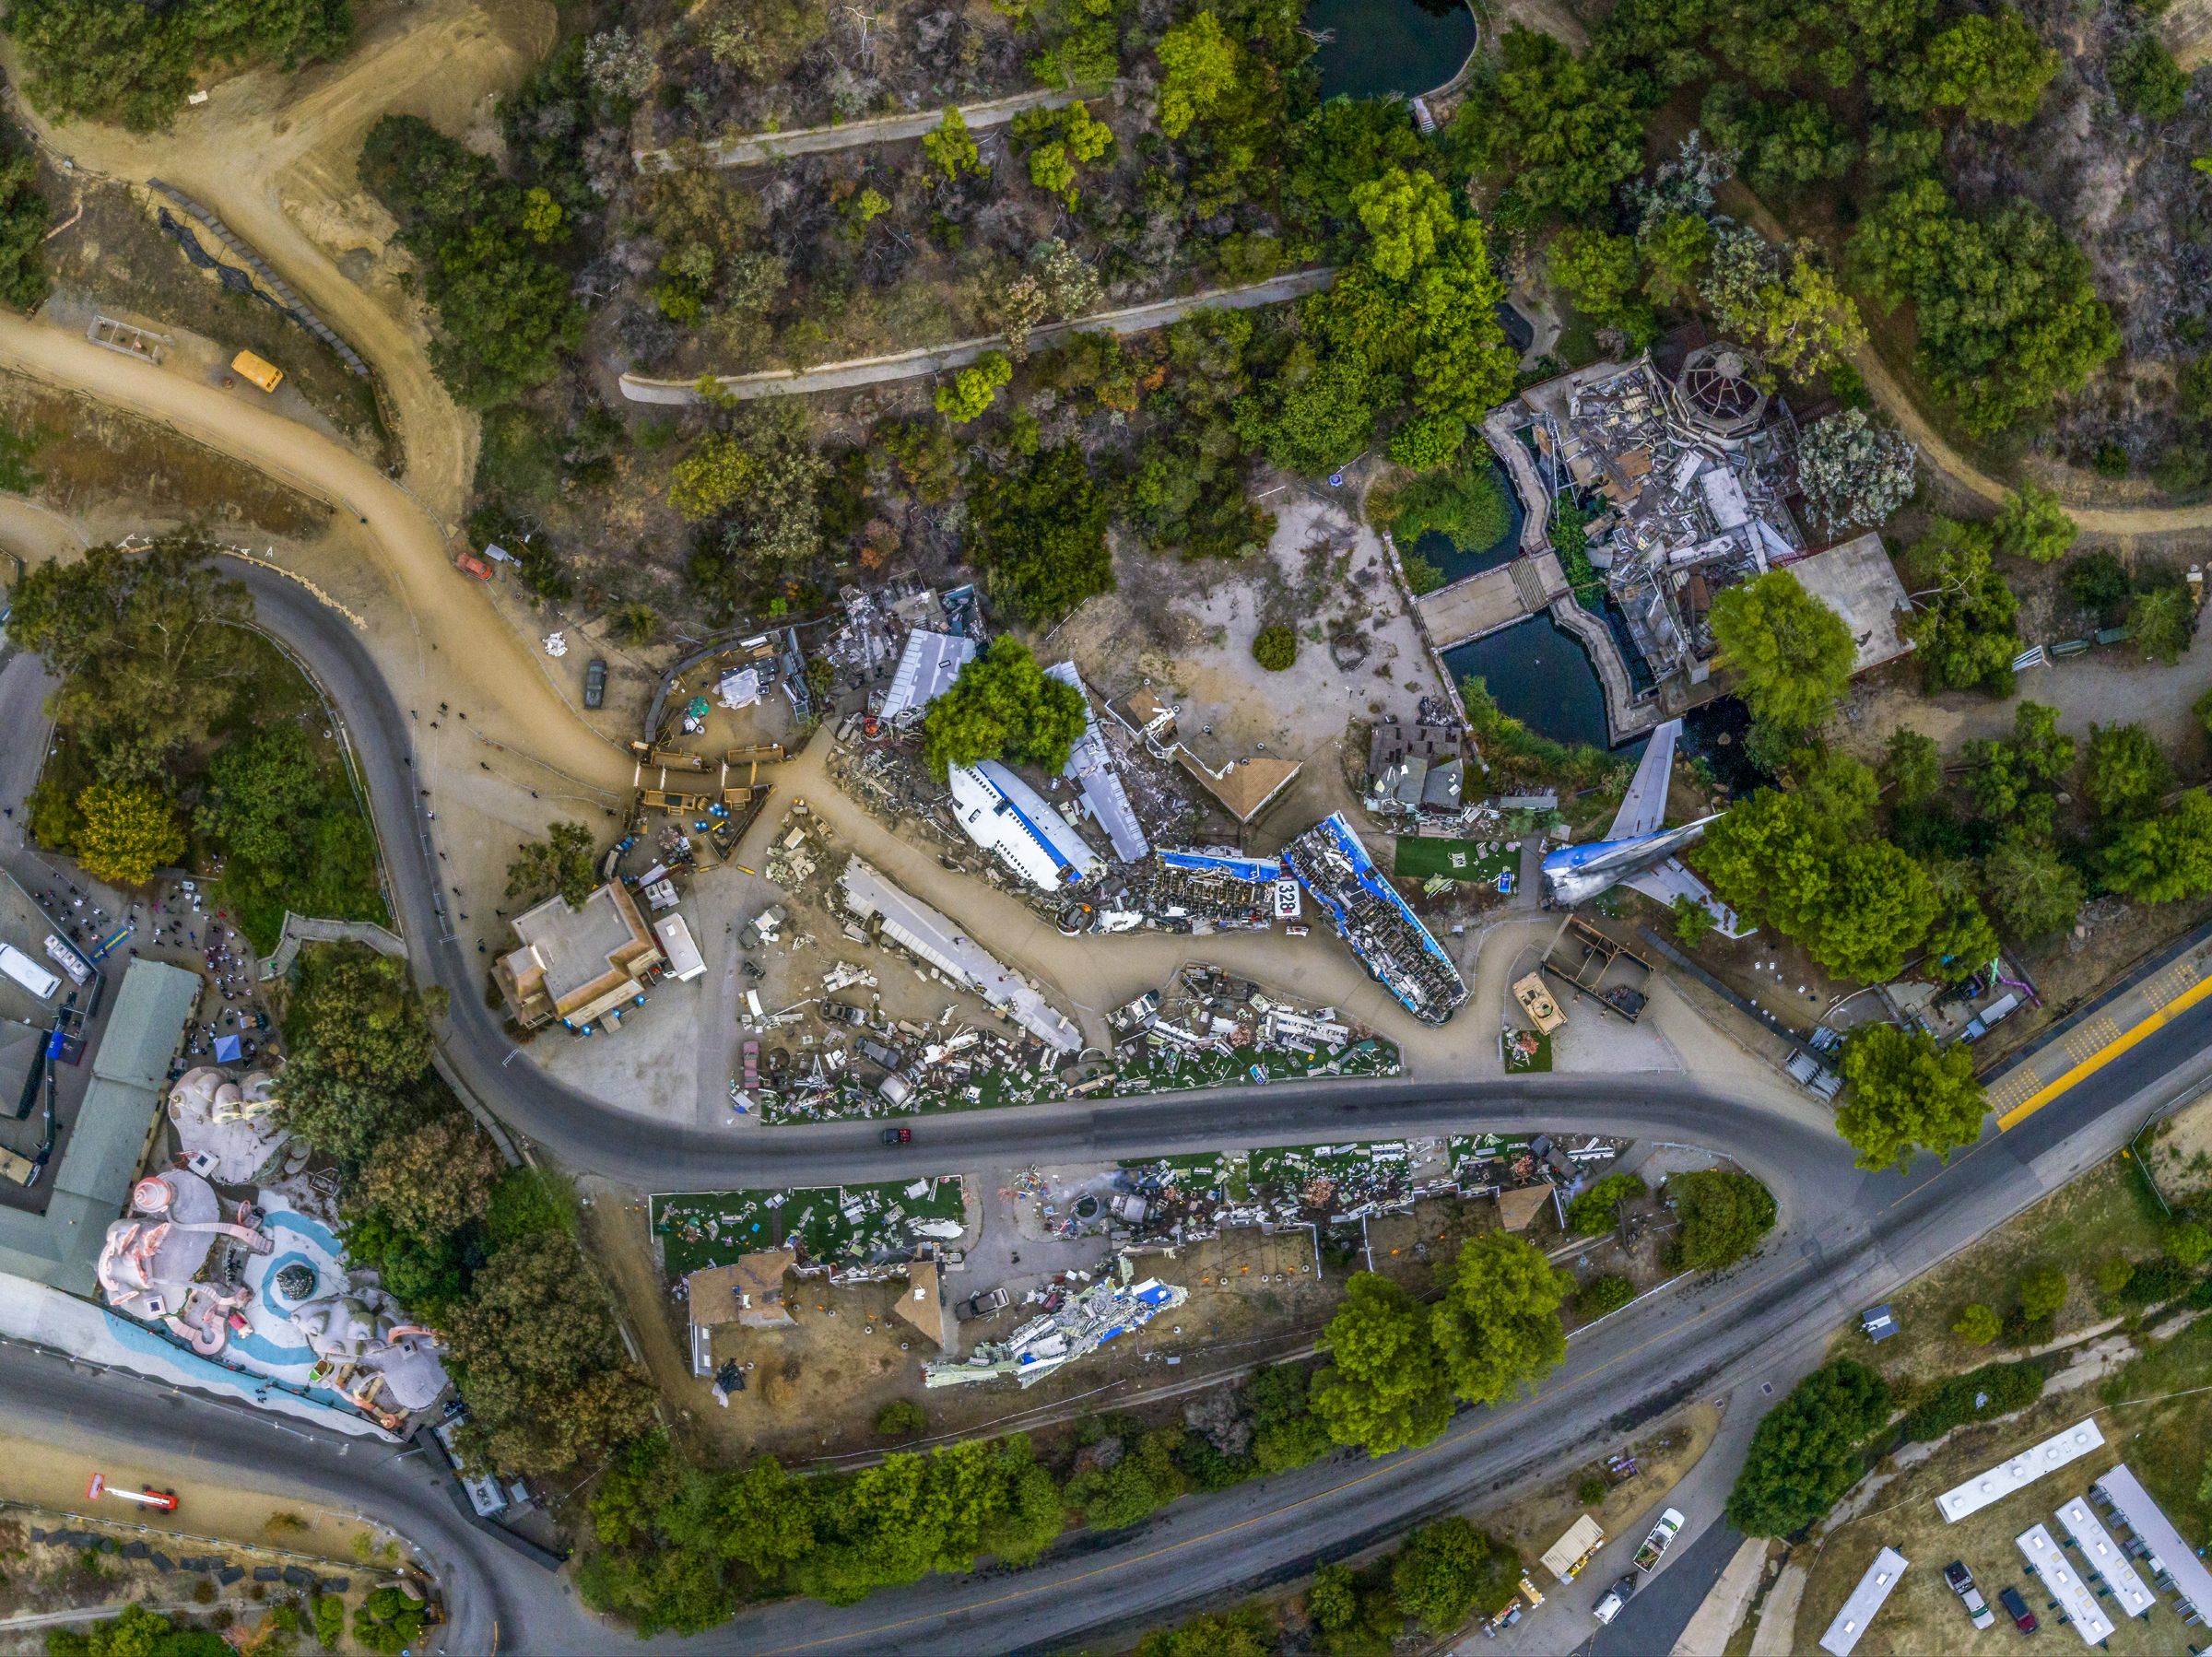 Parks and Recreation: Helicopter aerial photographs show where humans gather, America - 2015